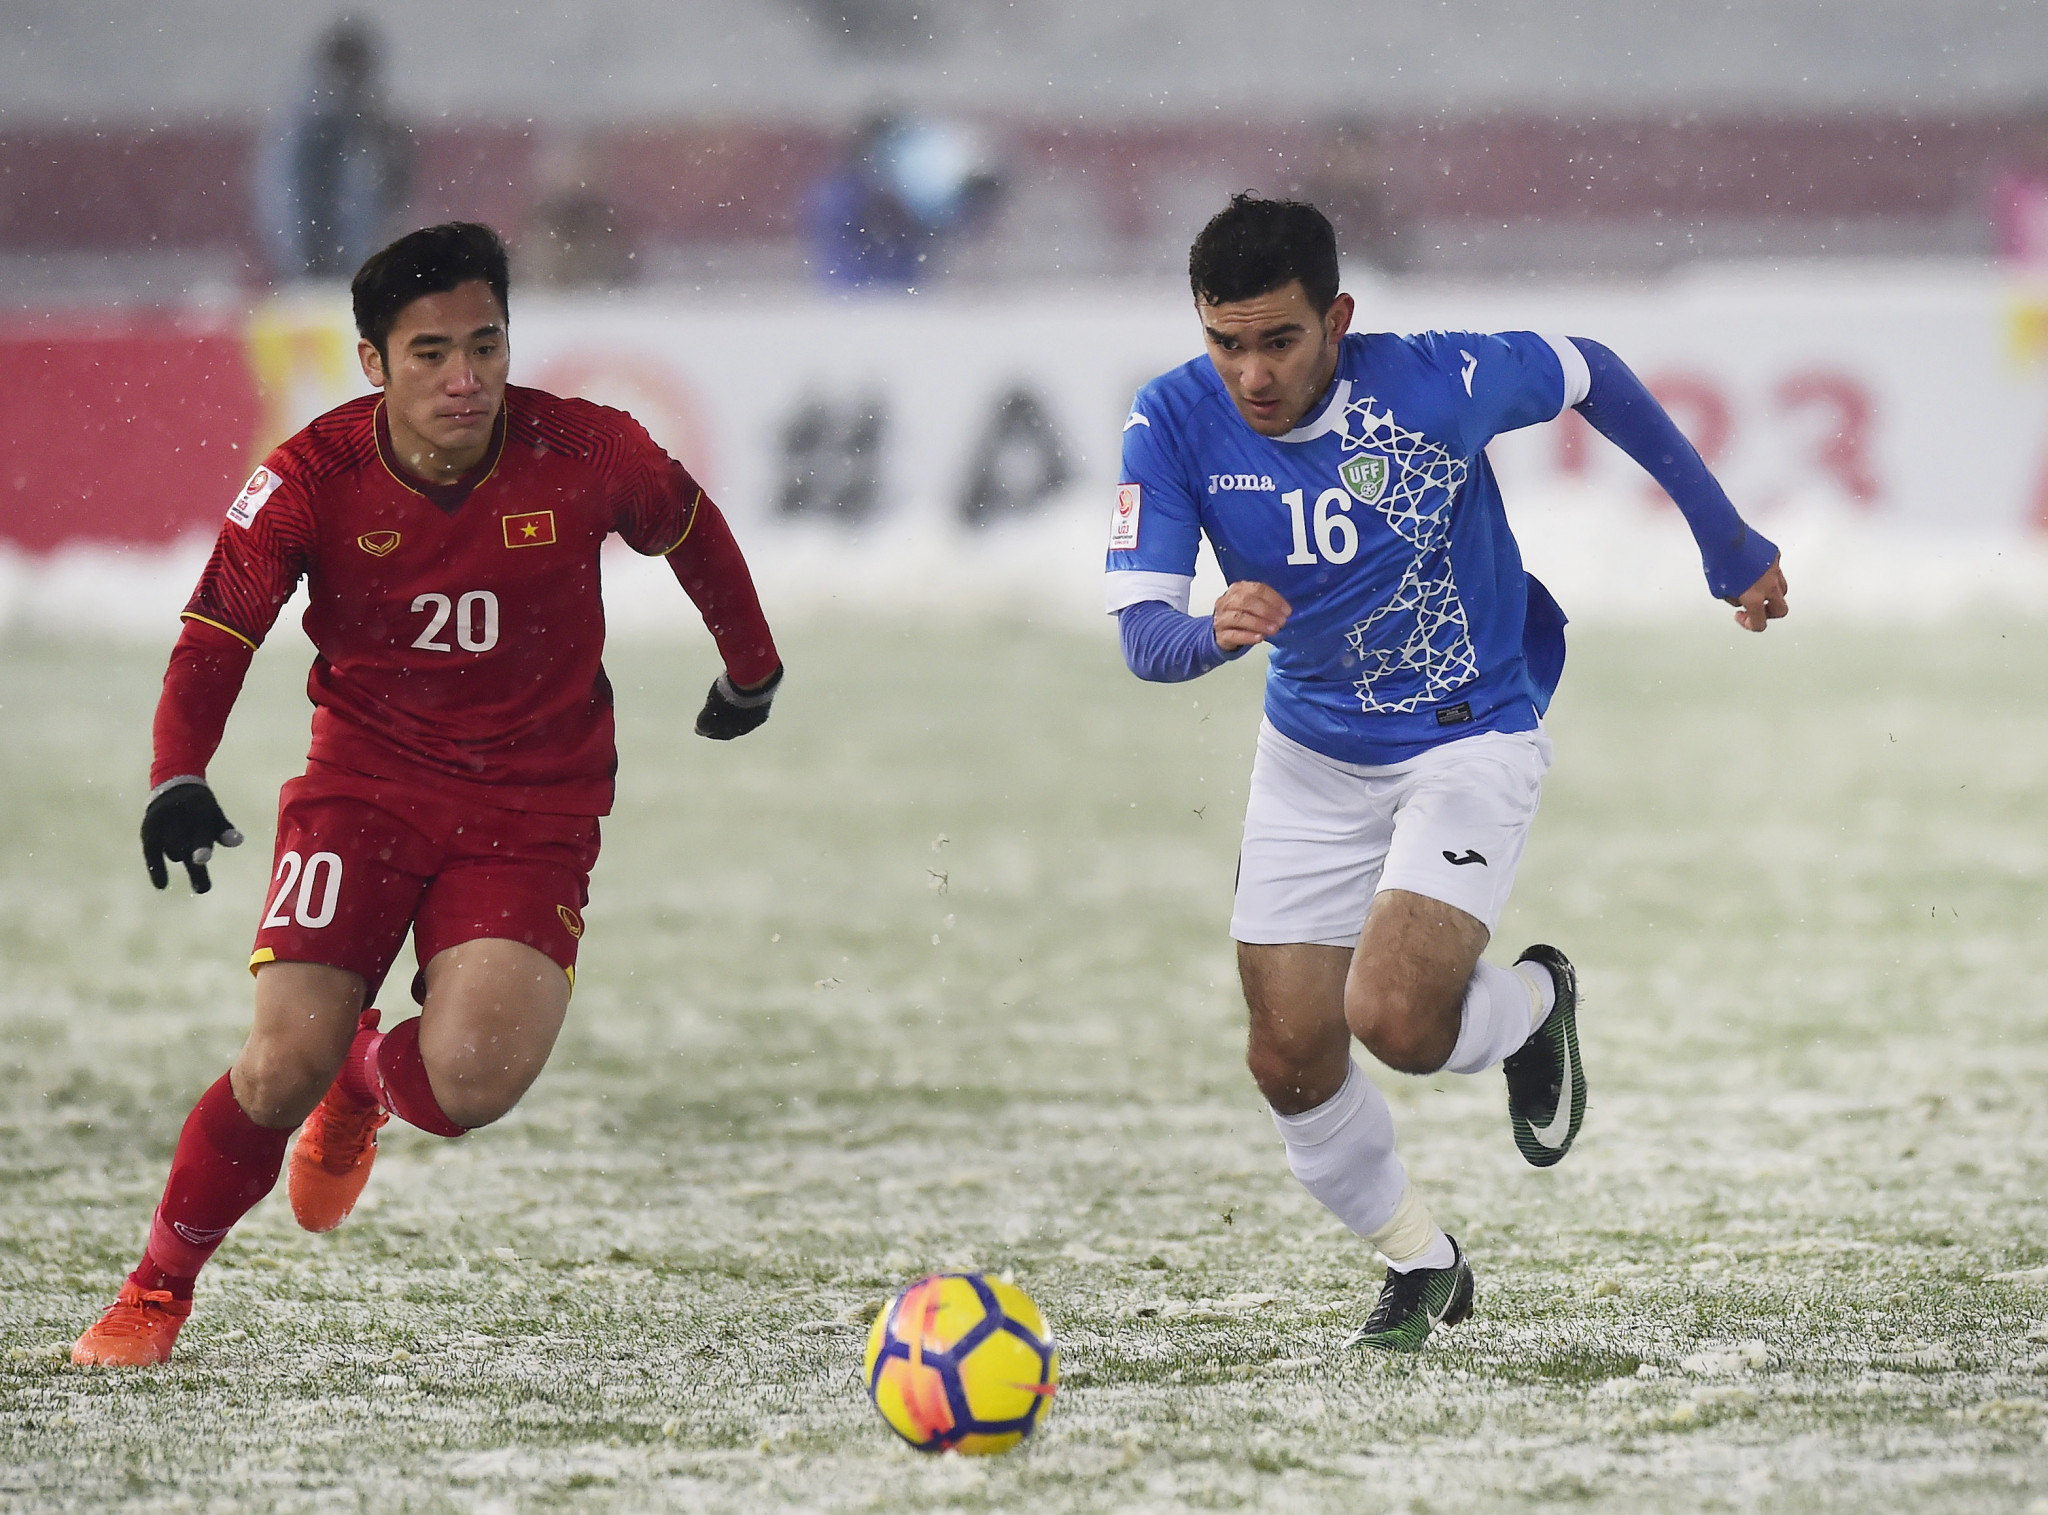 Uzbekistan beat Vietnam in the final of this year's AFC Under-23 Championship, which was played in extreme weather conditions ©Getty Images